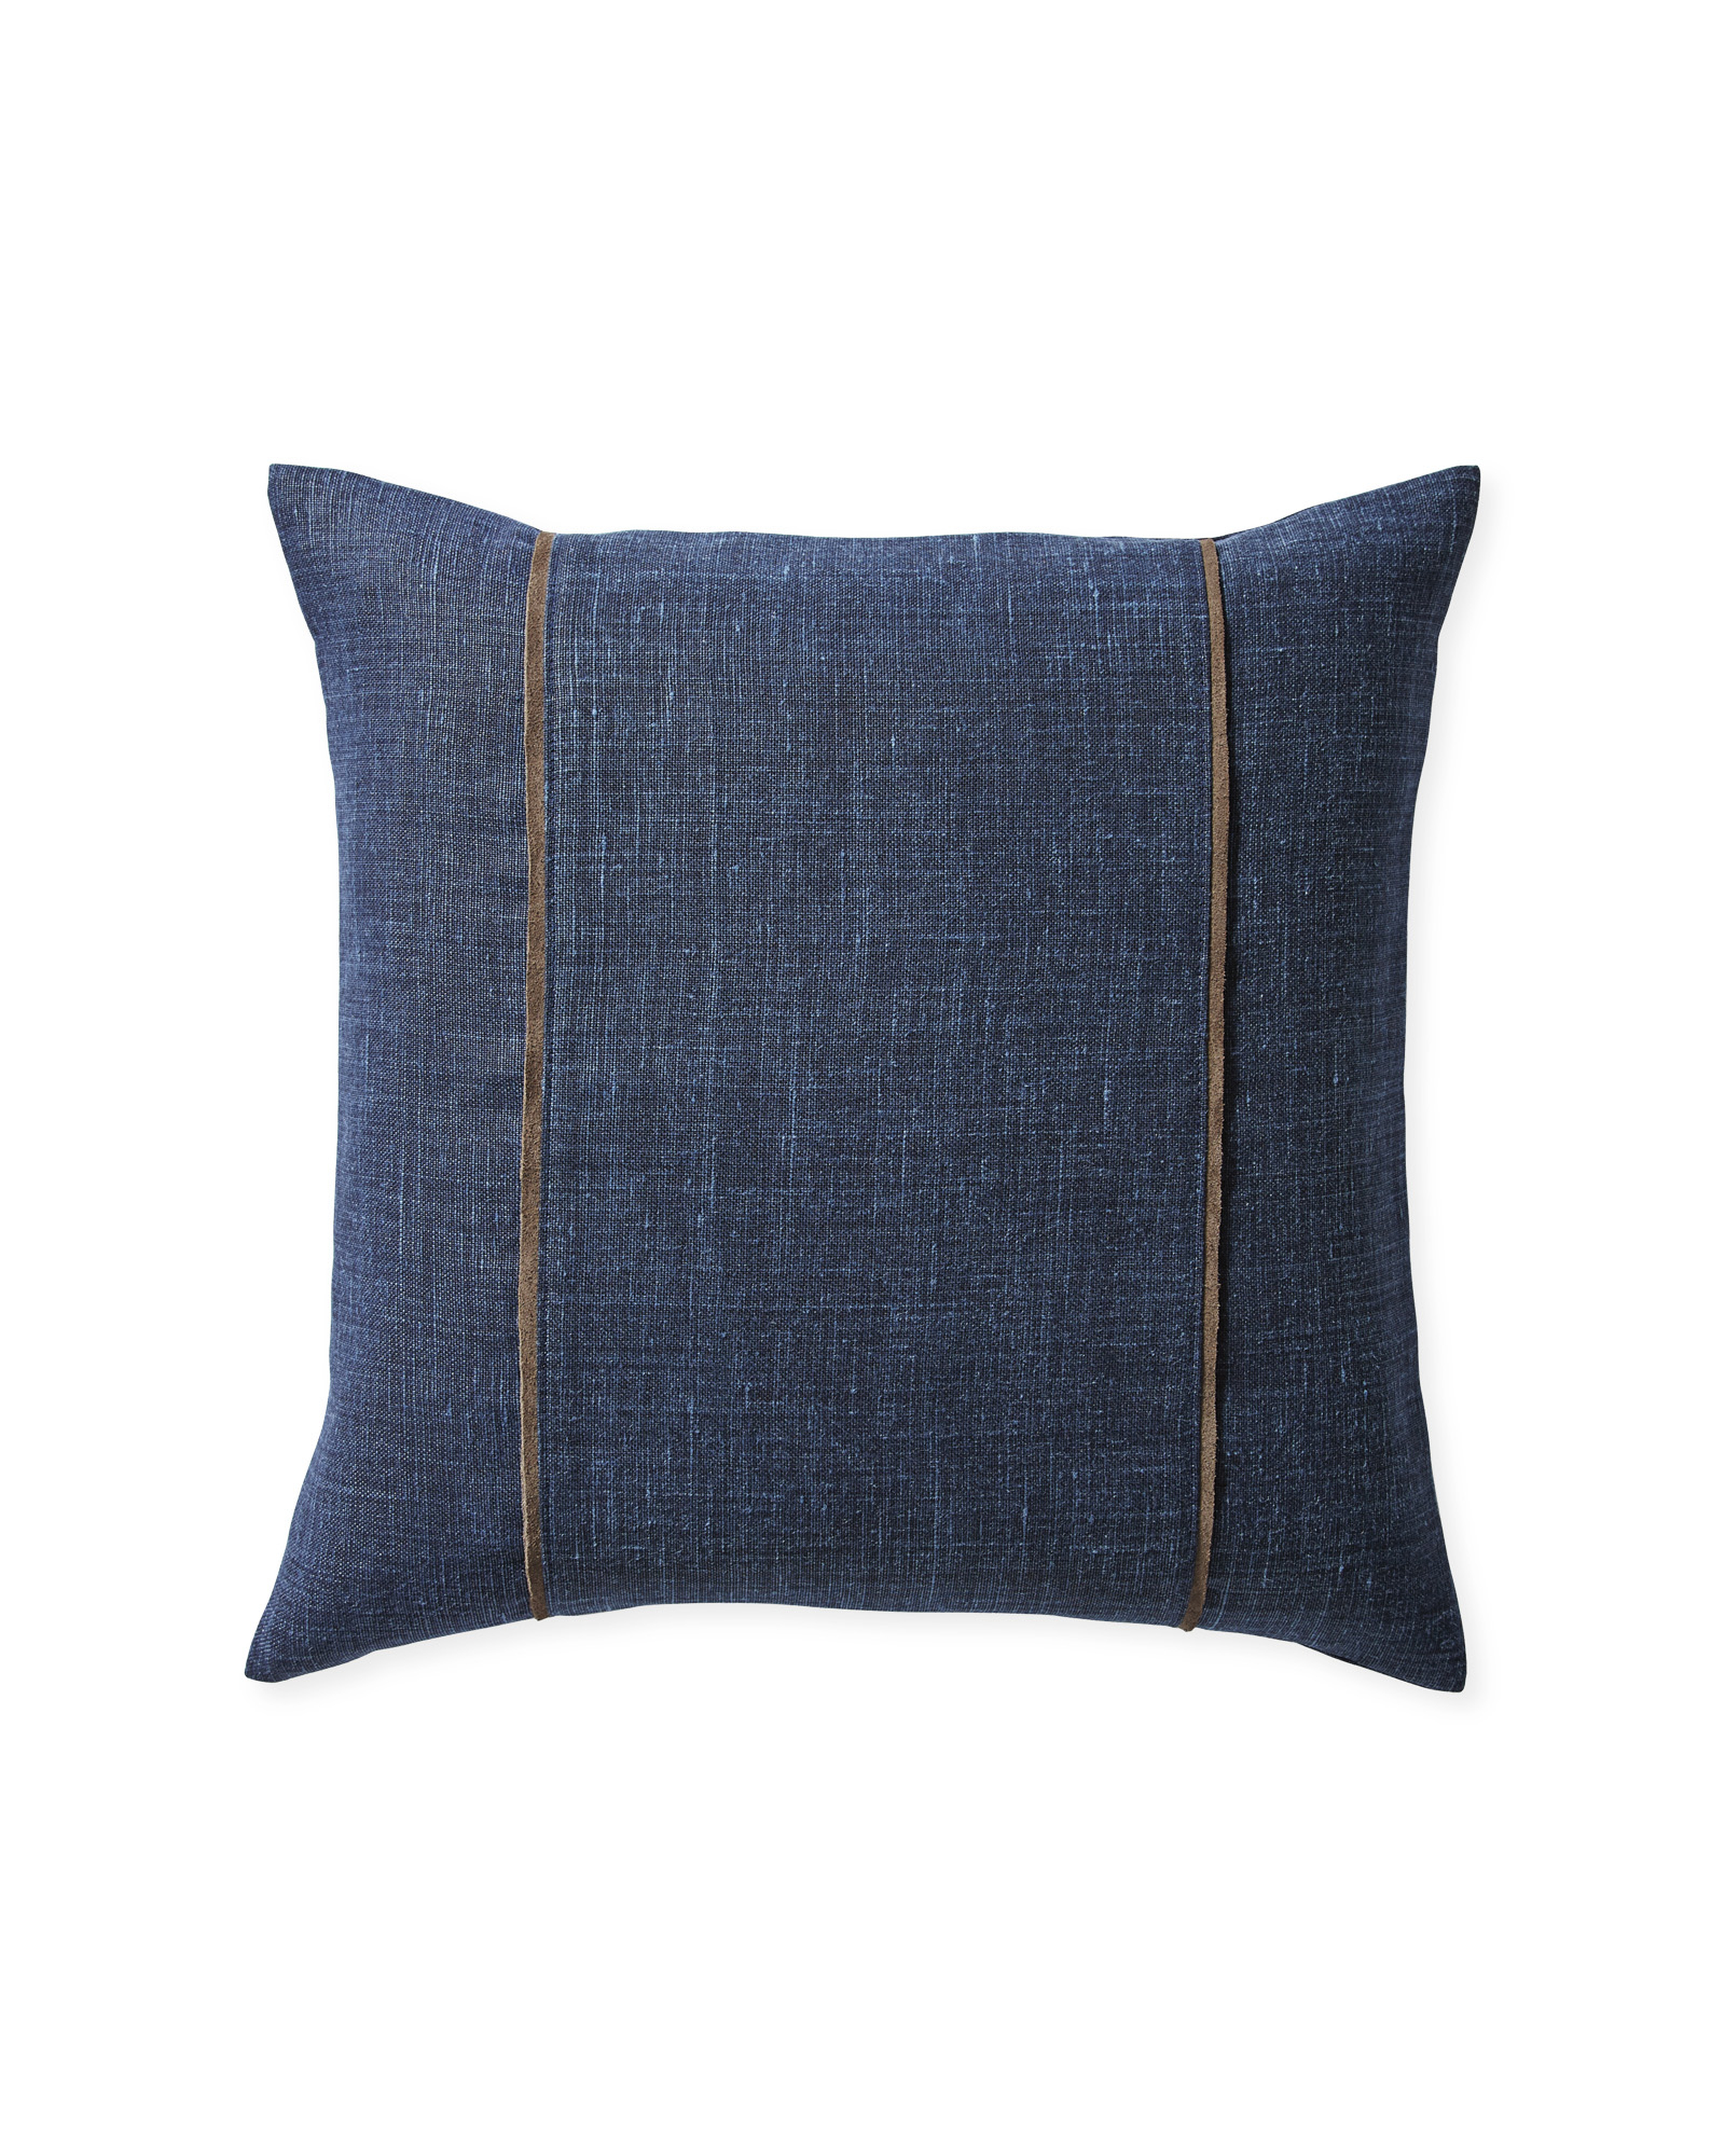 Kentfield 20" SQ Pillow Cover - Navy - Insert sold separately - Serena and Lily